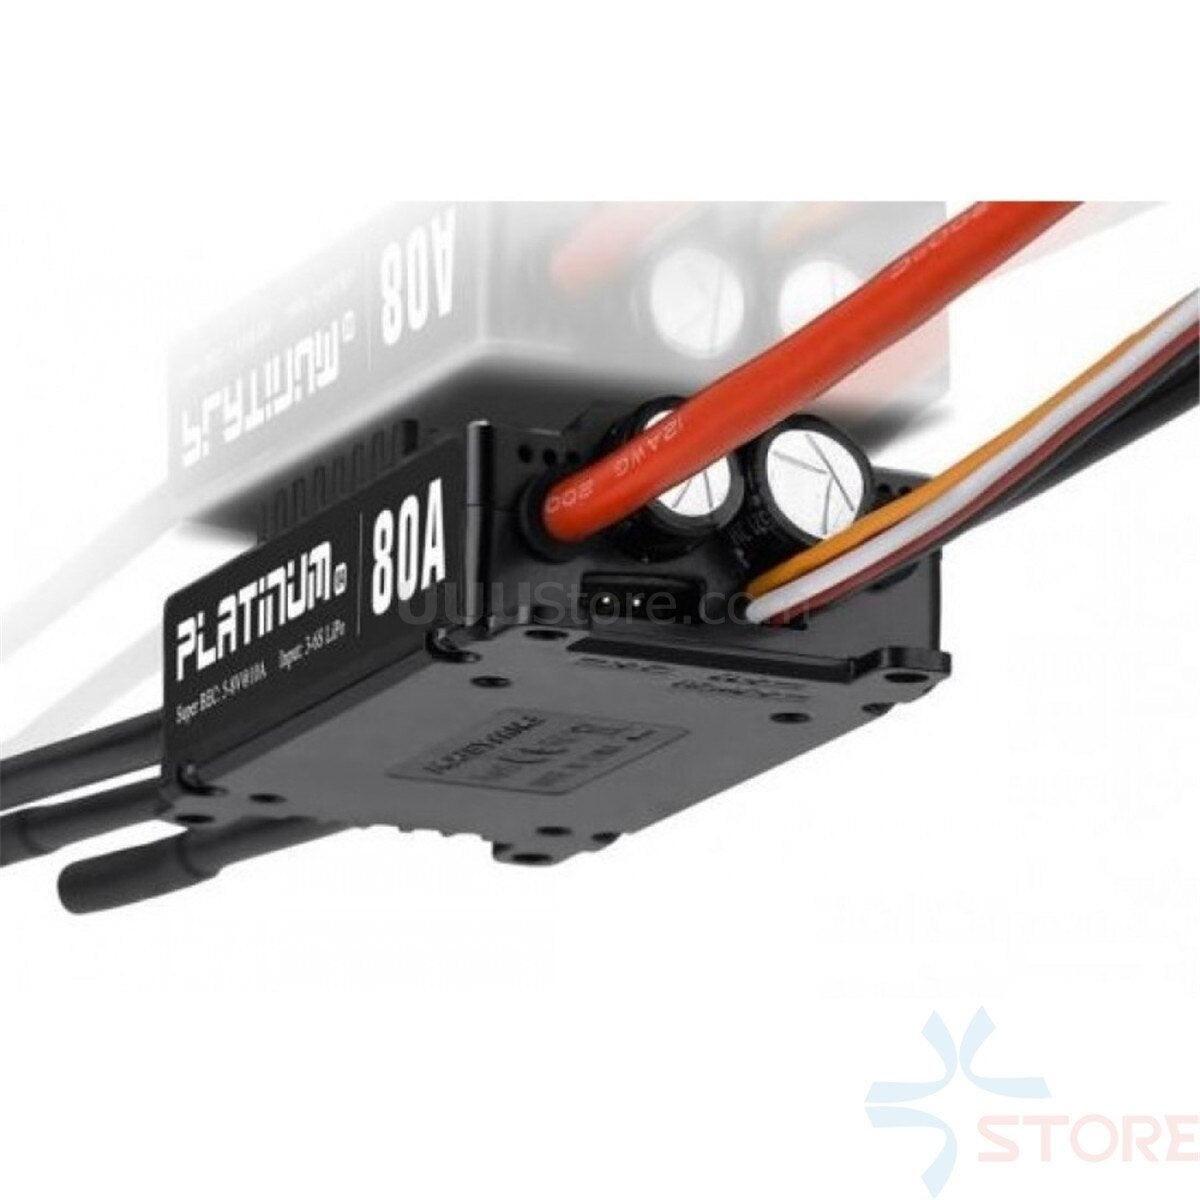 HobbyWing Platinum 80A V4 ESC 3S-6S BEC 5-8V 10A for 450L-500 Class Heli RC Drone Aircraft Helicopter - RCDrone